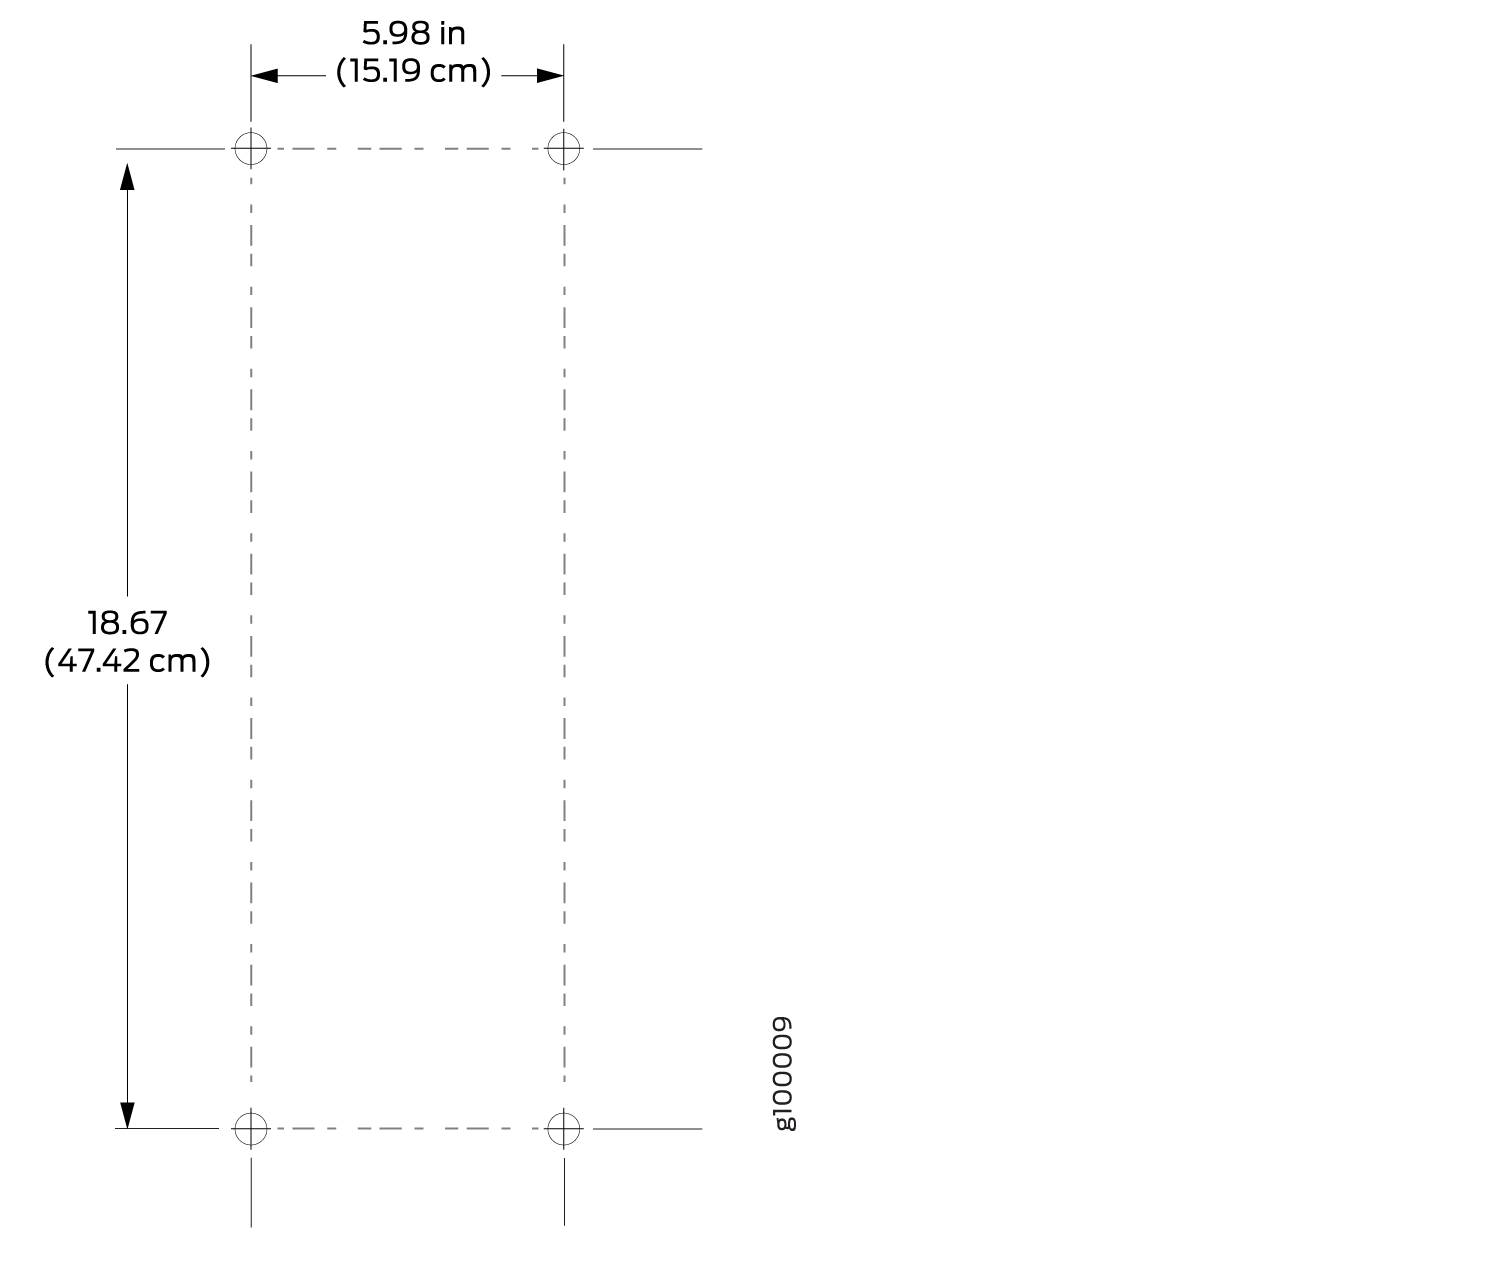 Measurements for Installing Mounting Screws for NFX150-S1 Device on a Wall